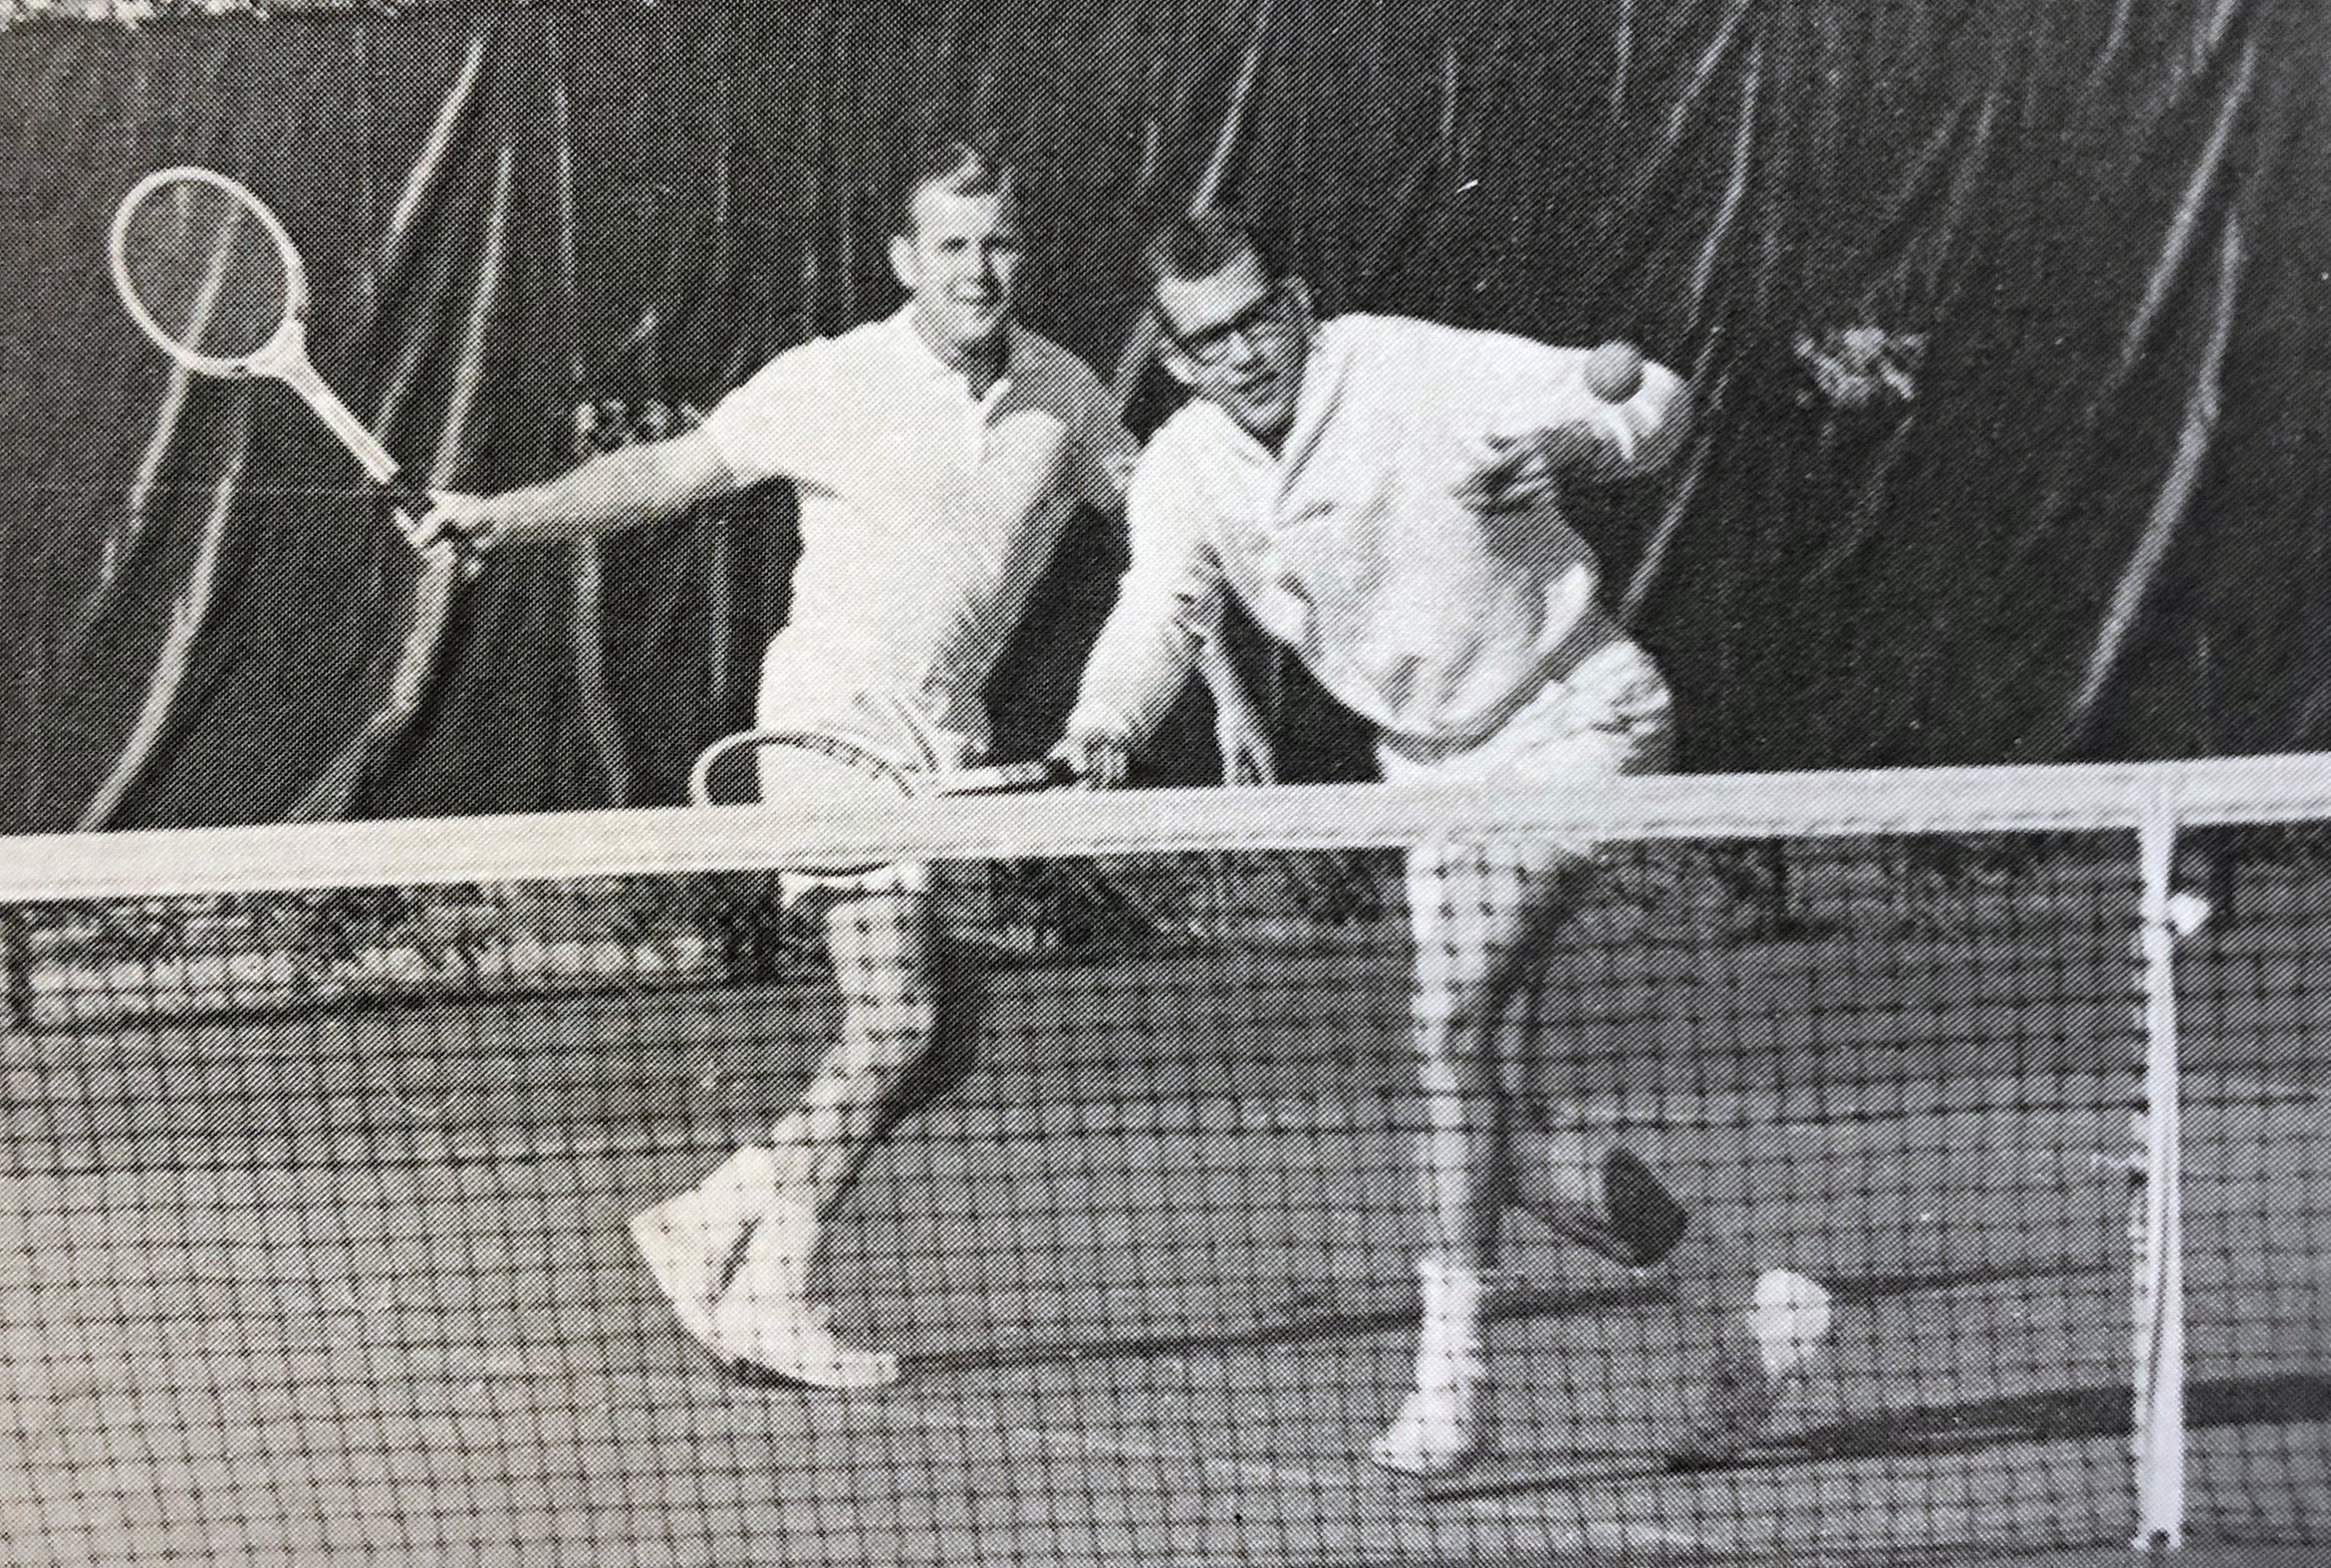 Dave Moffett and Bob Goss playing doubles